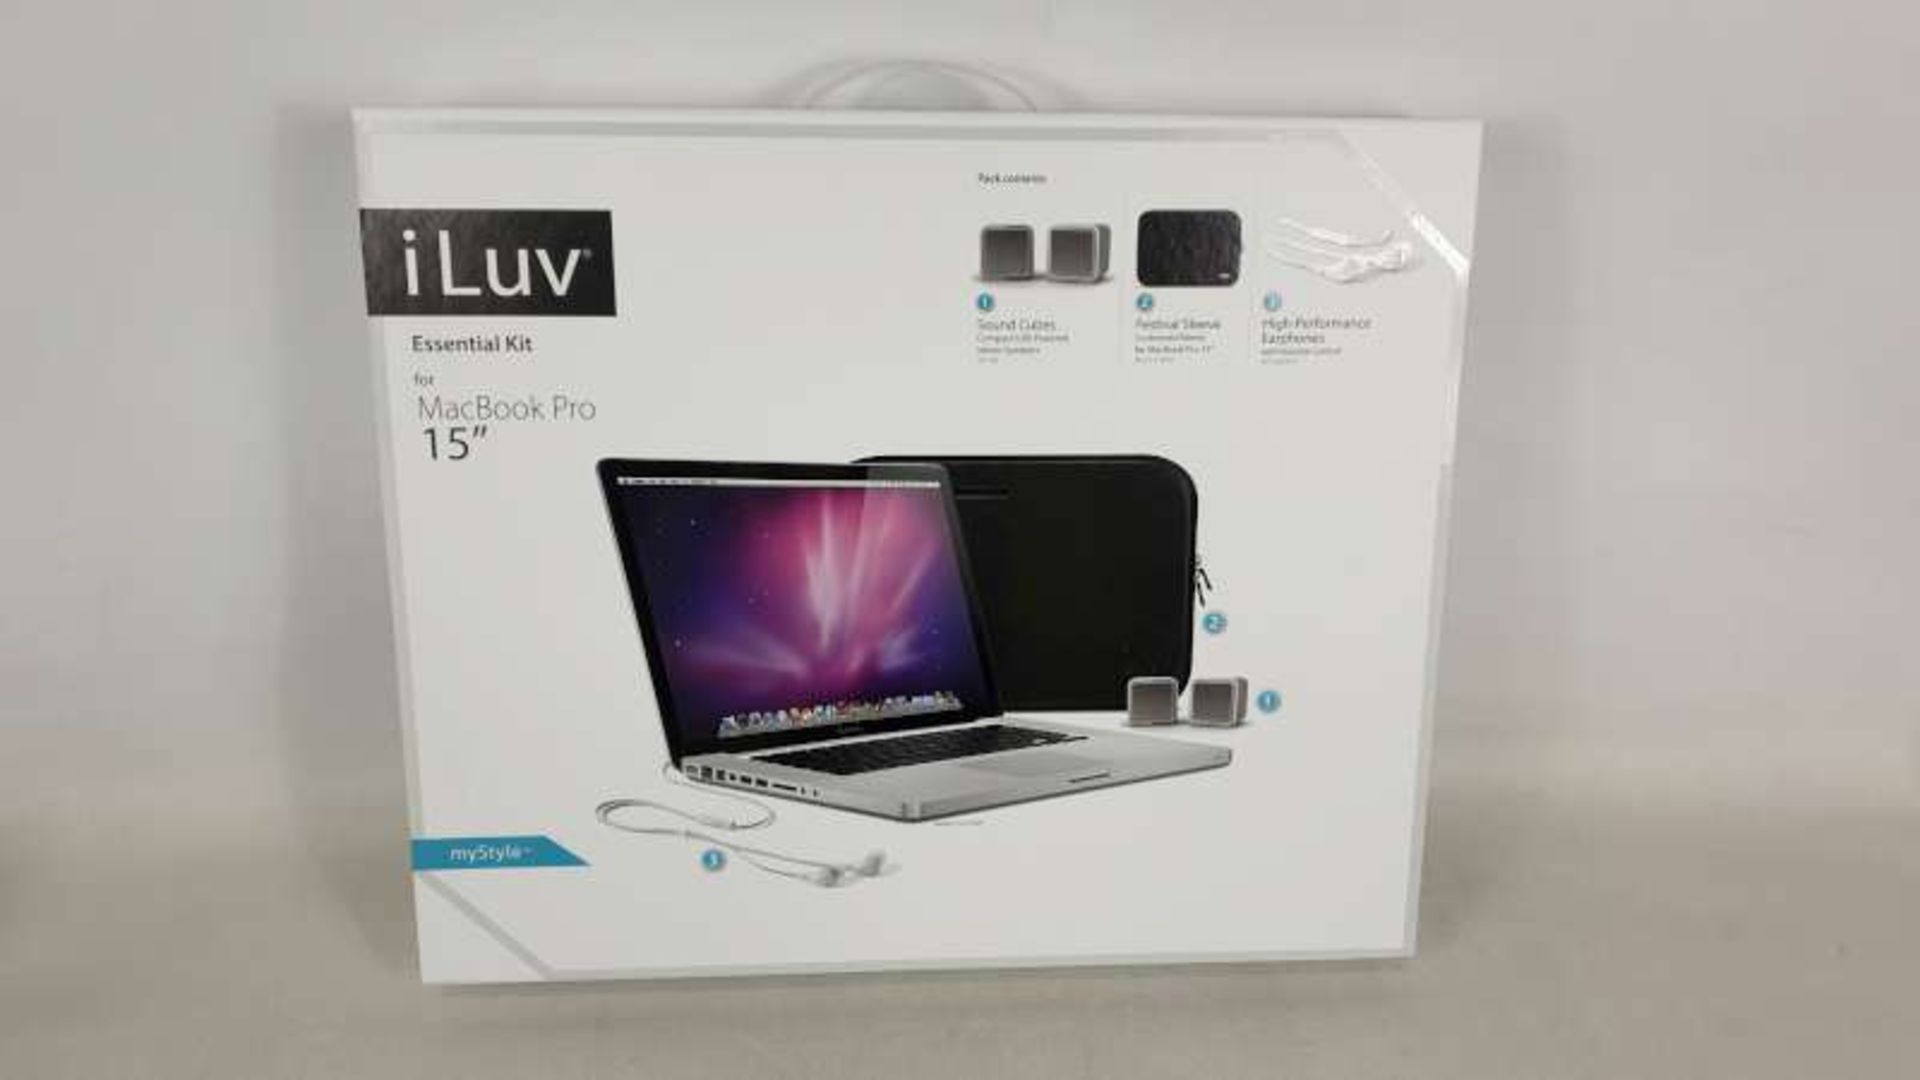 24 X ILUV ESSENTIAL KIT FOR 15" MACBOOK PRO, EACH KIT CONTAINS 2 X SOUND CUBES, FESTIVAL SLEEVE,